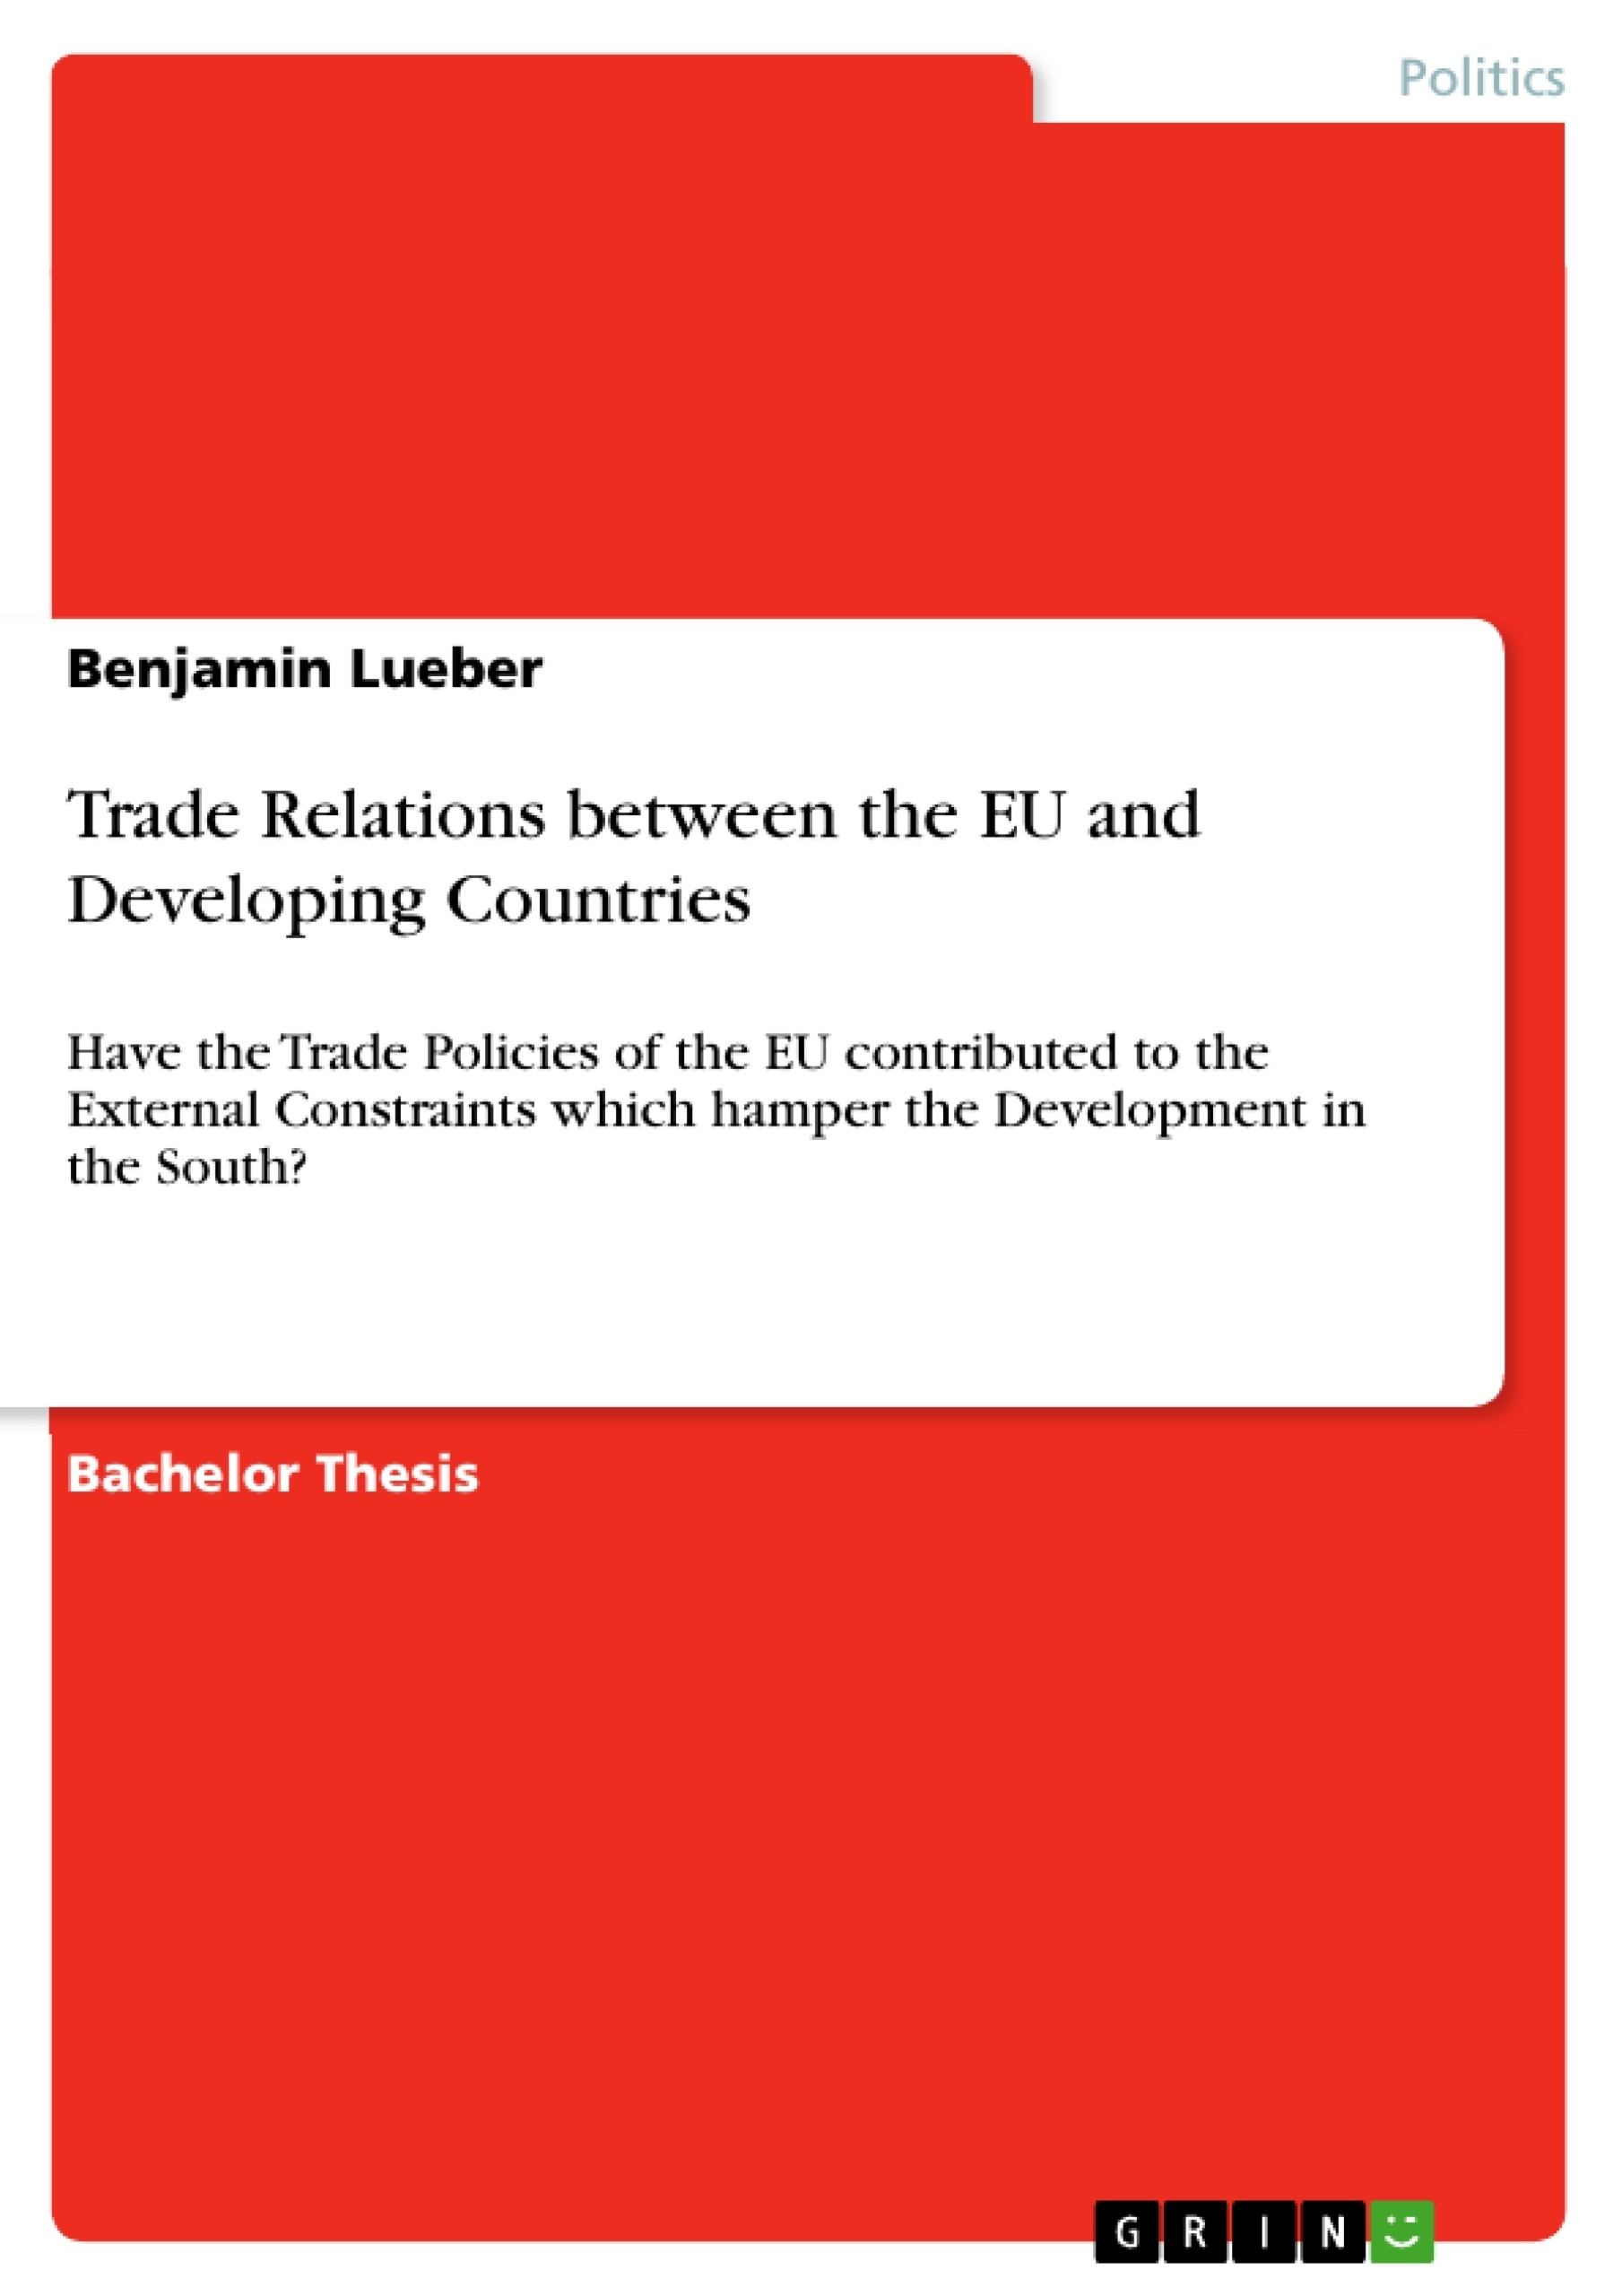 Title: Trade Relations between the EU and Developing Countries